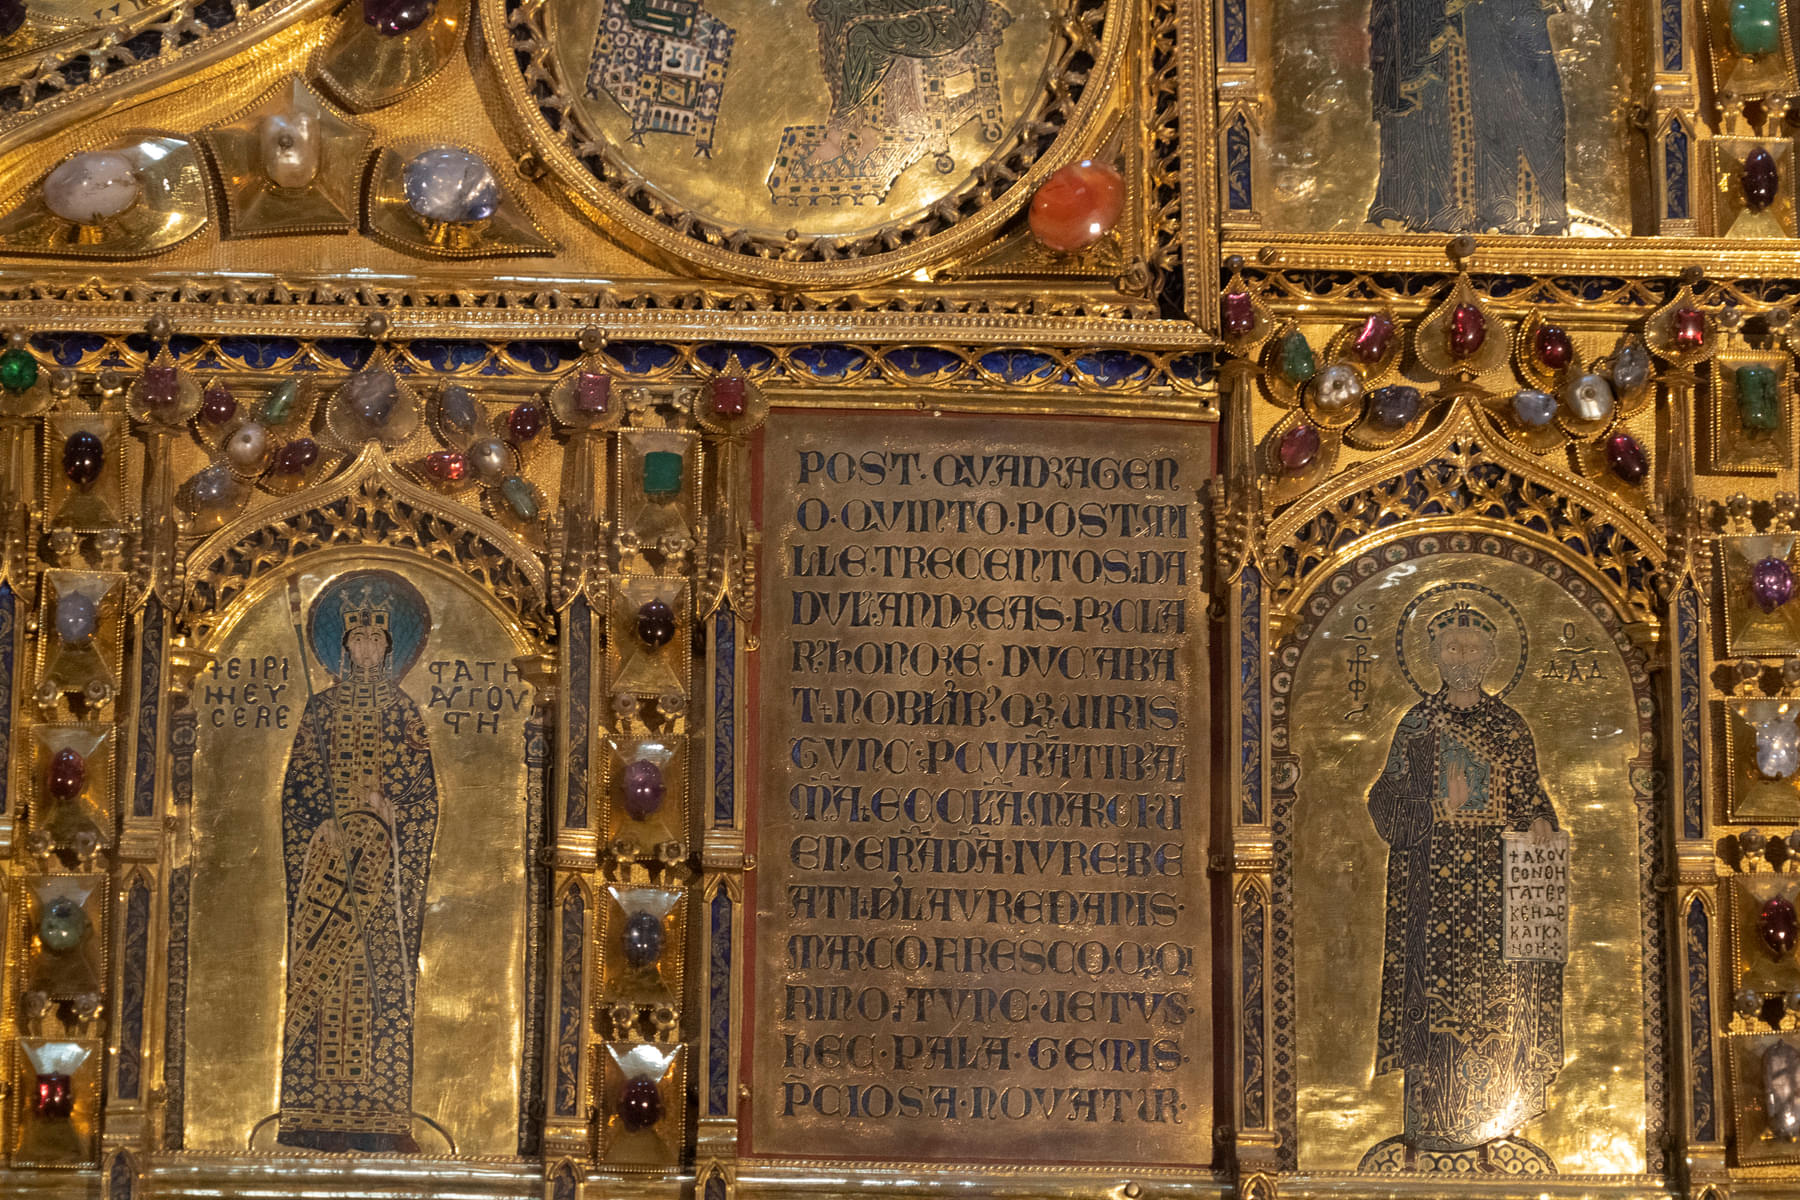 Architect of Pala d'Oro in St. Mark's Basilica